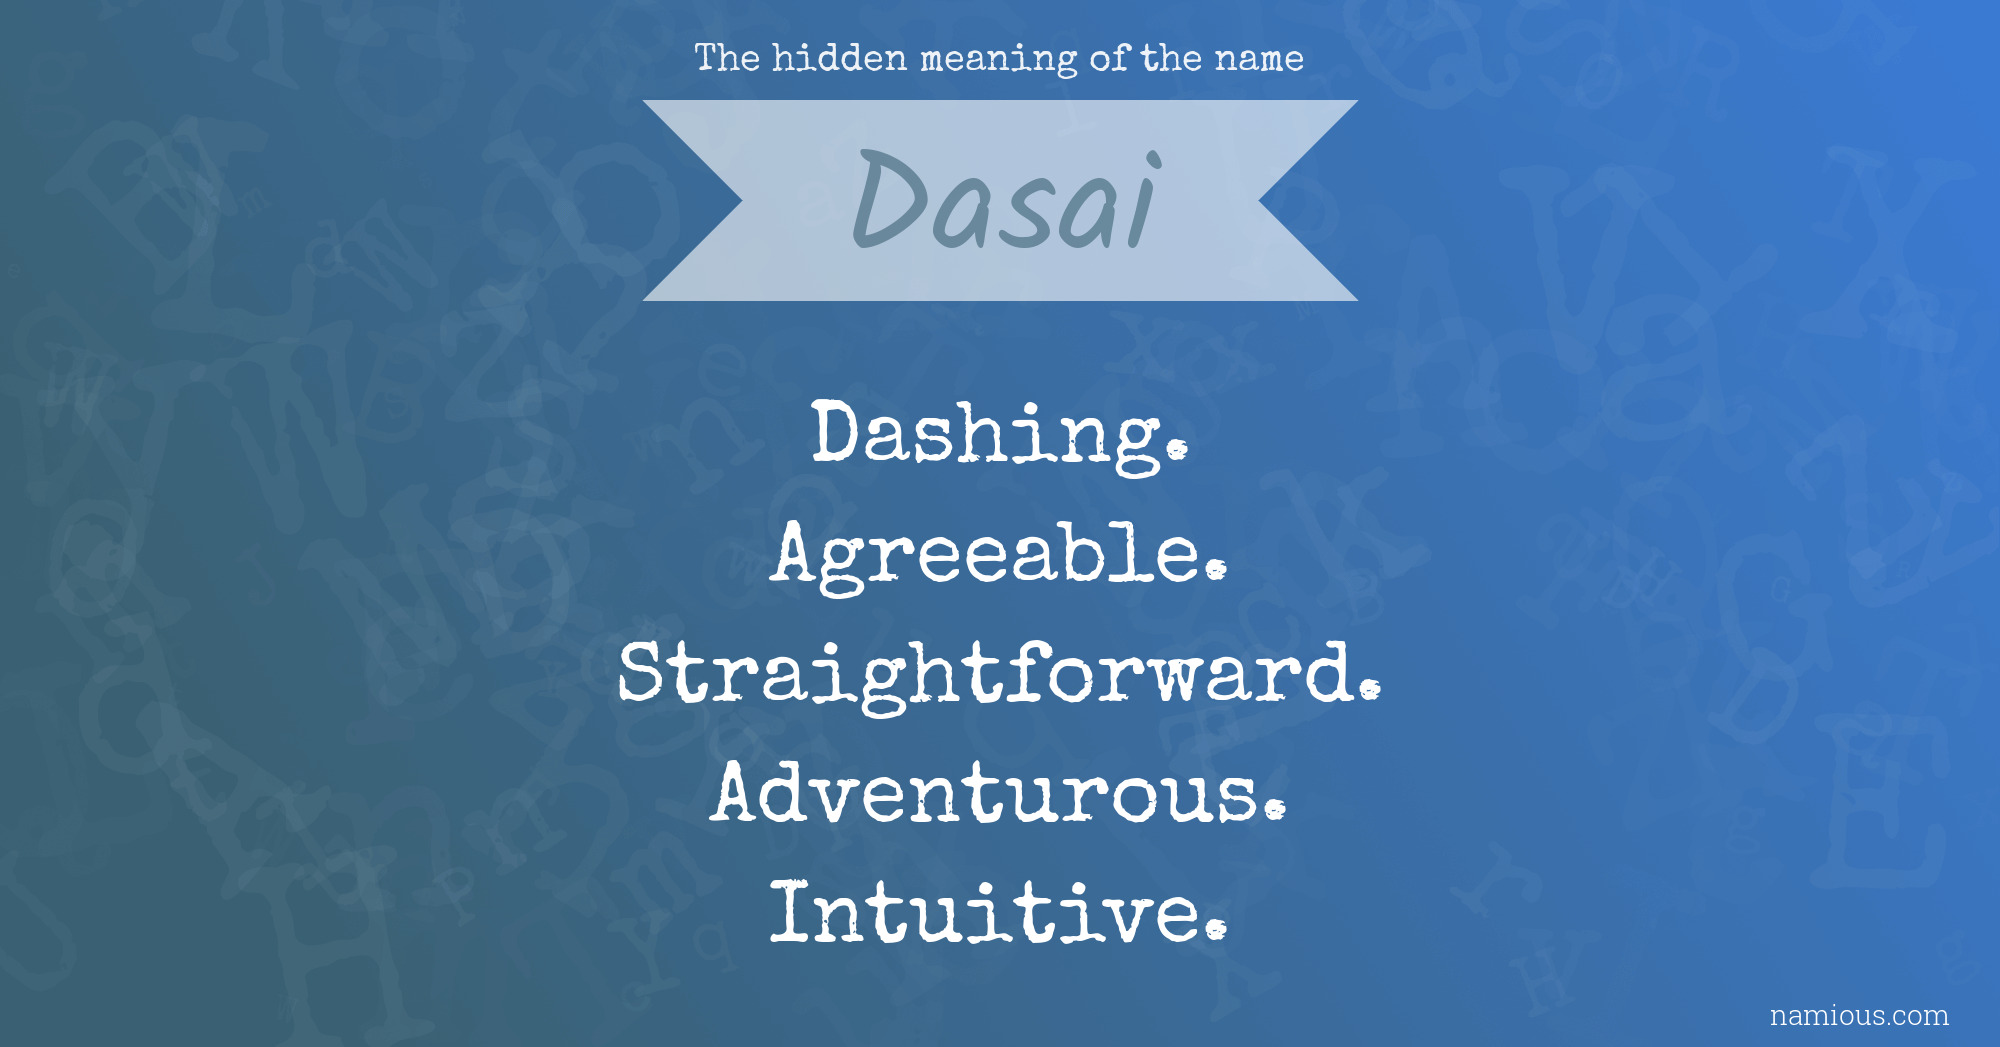 The hidden meaning of the name Dasai